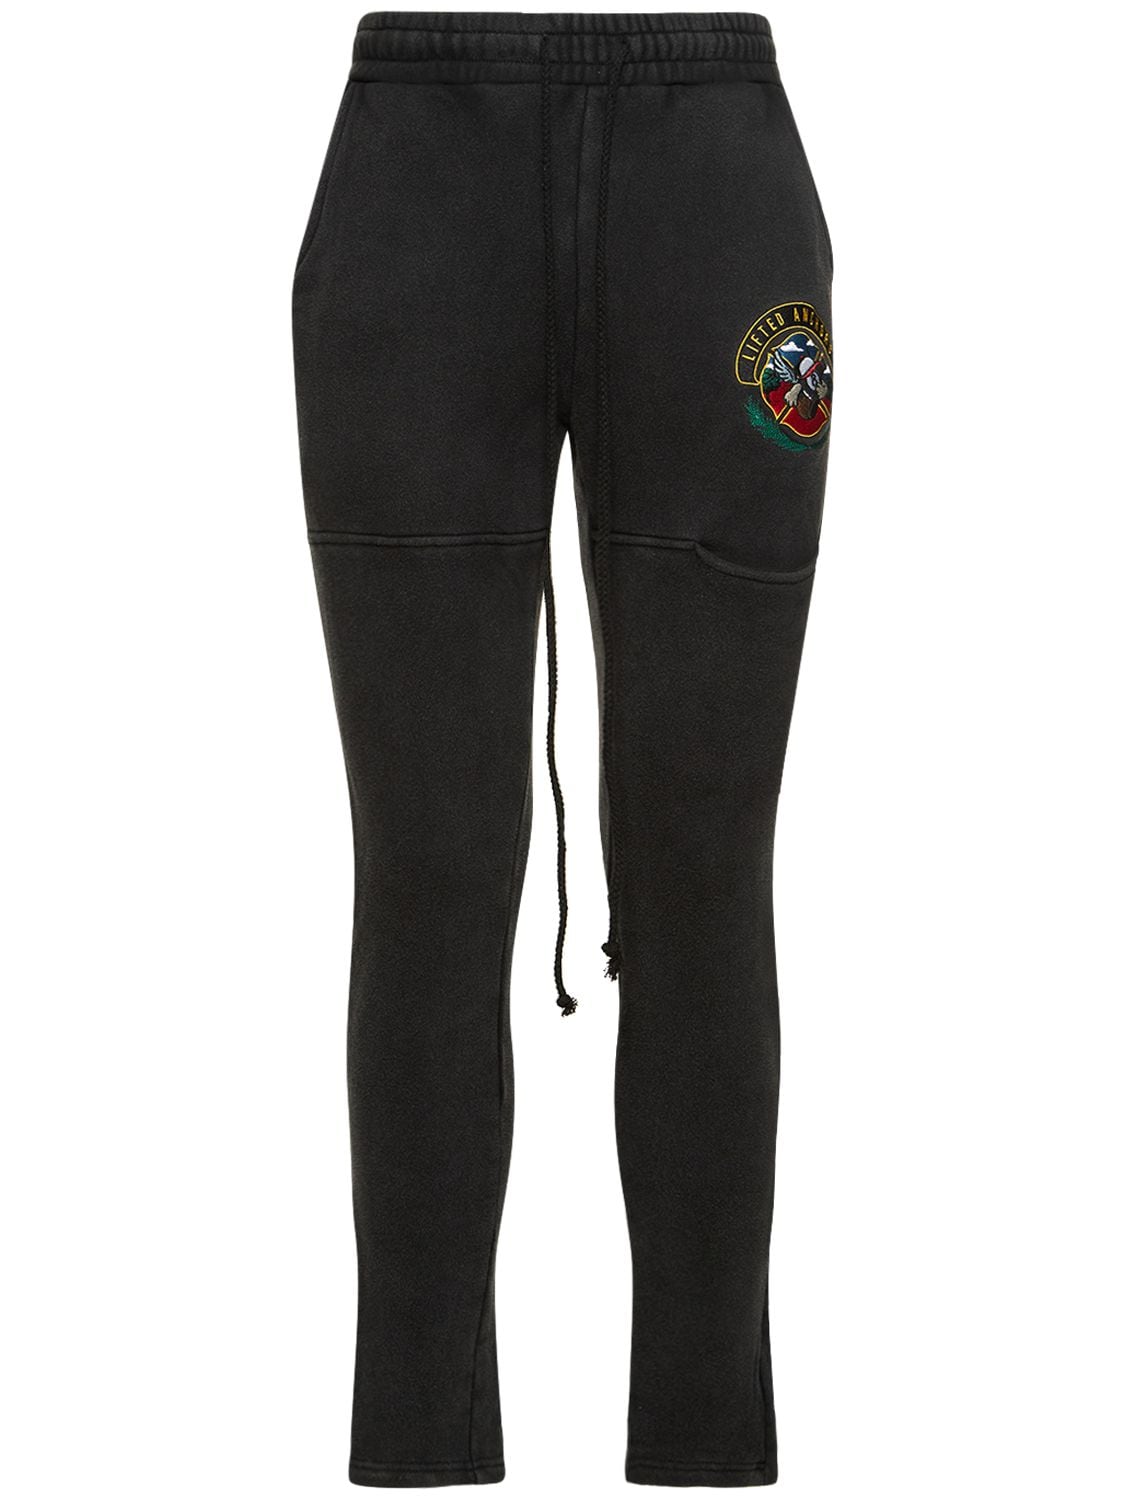 Lifted Anchors Ashford Sweatpants W/ Patch In Black